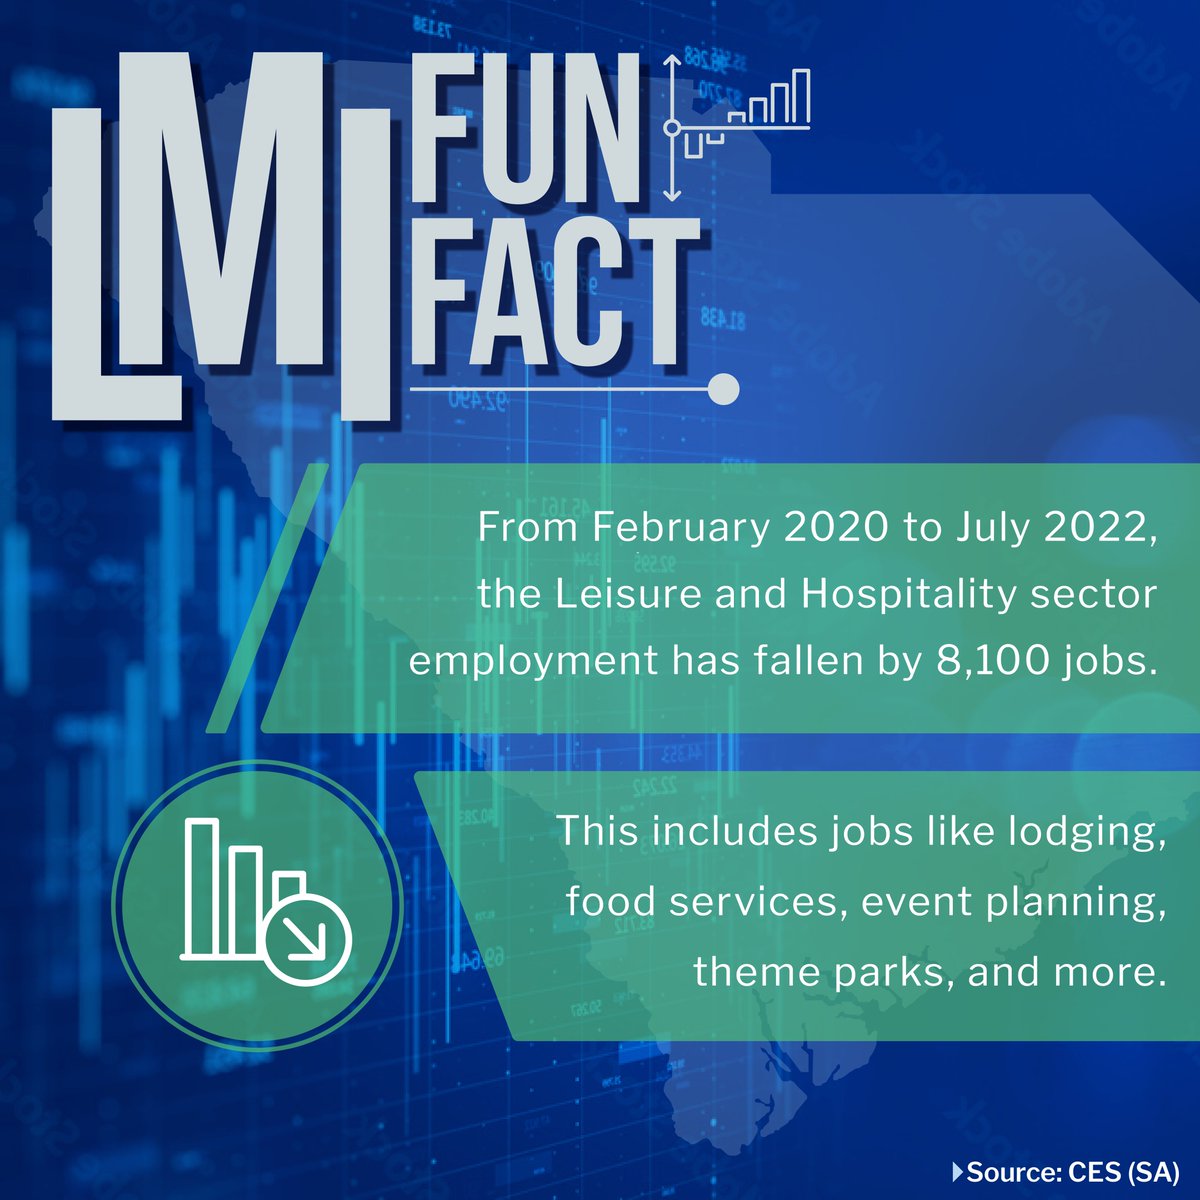 Workforce Development Month is here! Want more labor market information (LMI) outside of this fun fact? Register to attend LMI Insights webinars to learn more. #scwdm forms.office.com/g/zPDri3pNpr